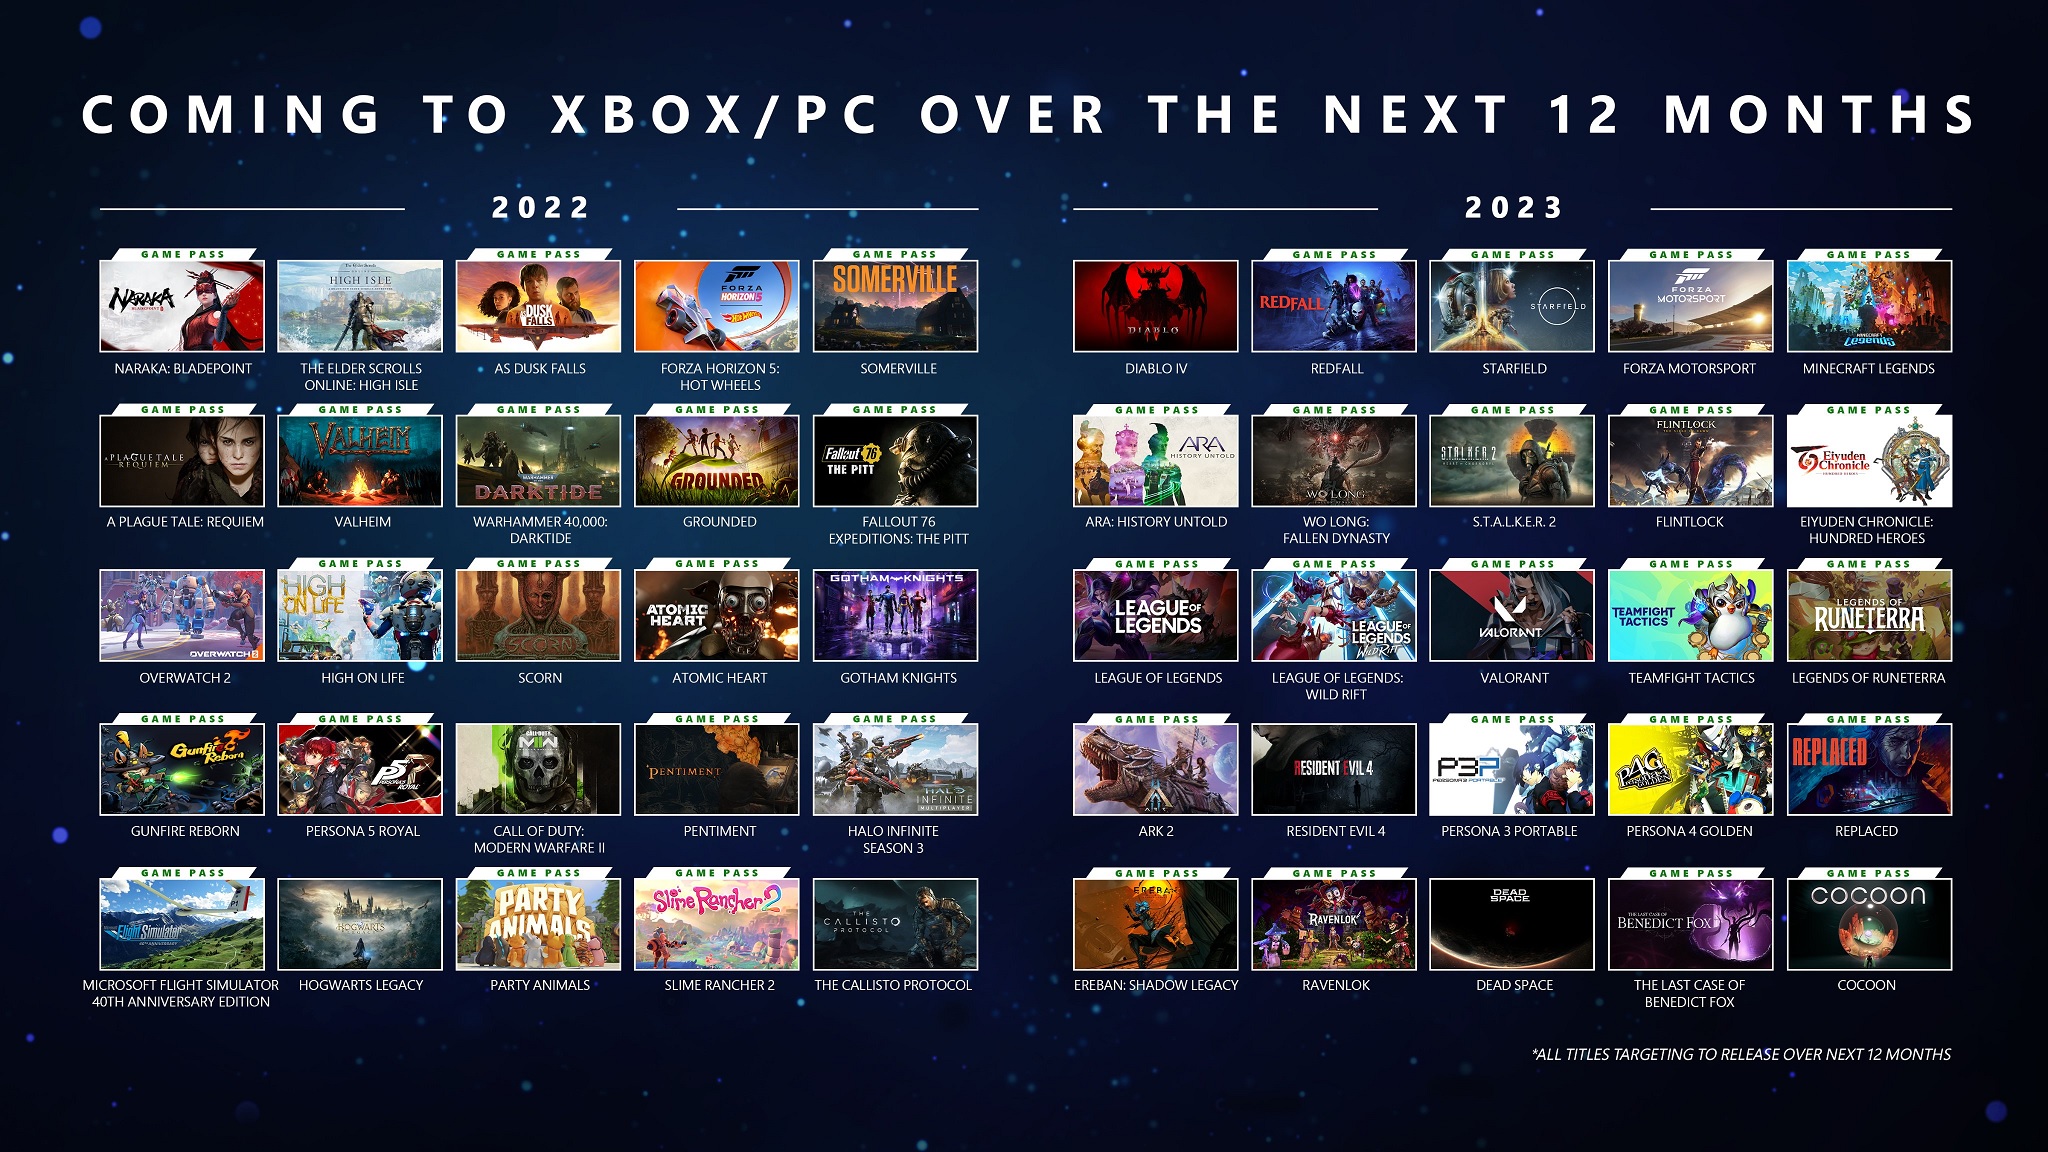 Xbox roadmap from June 2022 to June 2023